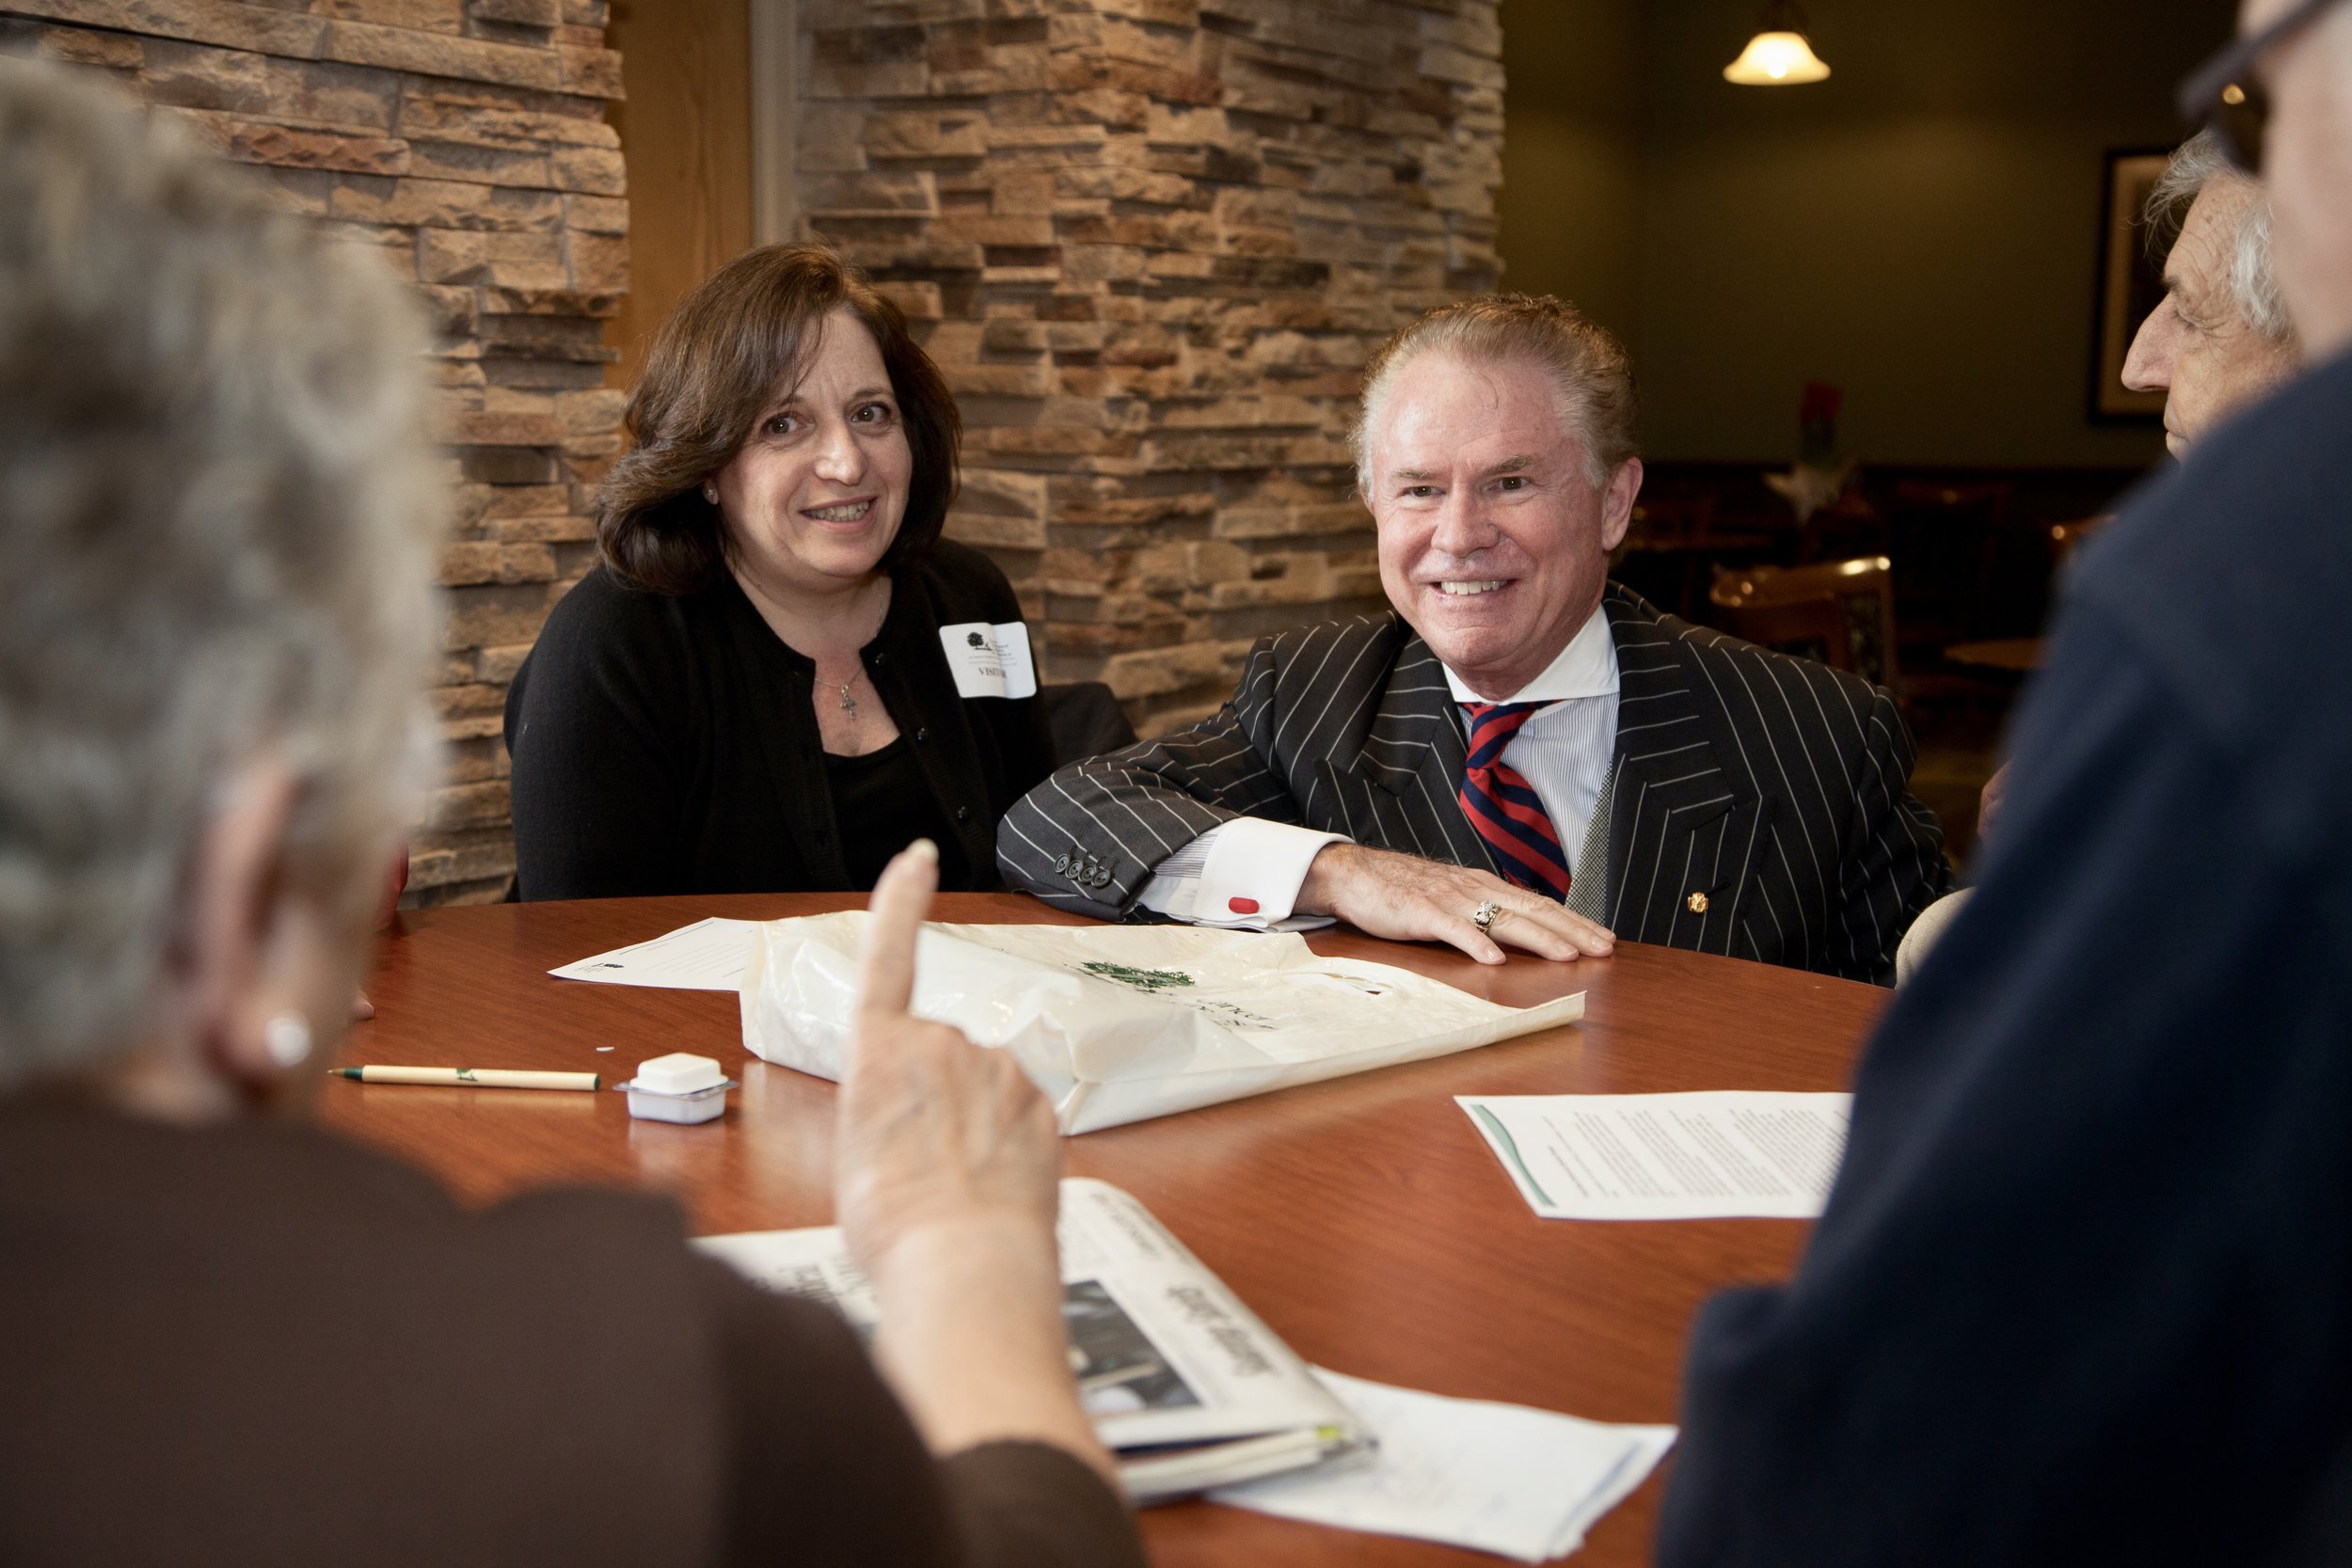 Alt text: an older white man with a receding hairline and wearing a pinstripe suit crouches down at a table and smiles at the other people sitting at the table, including a middle-aged white woman wit